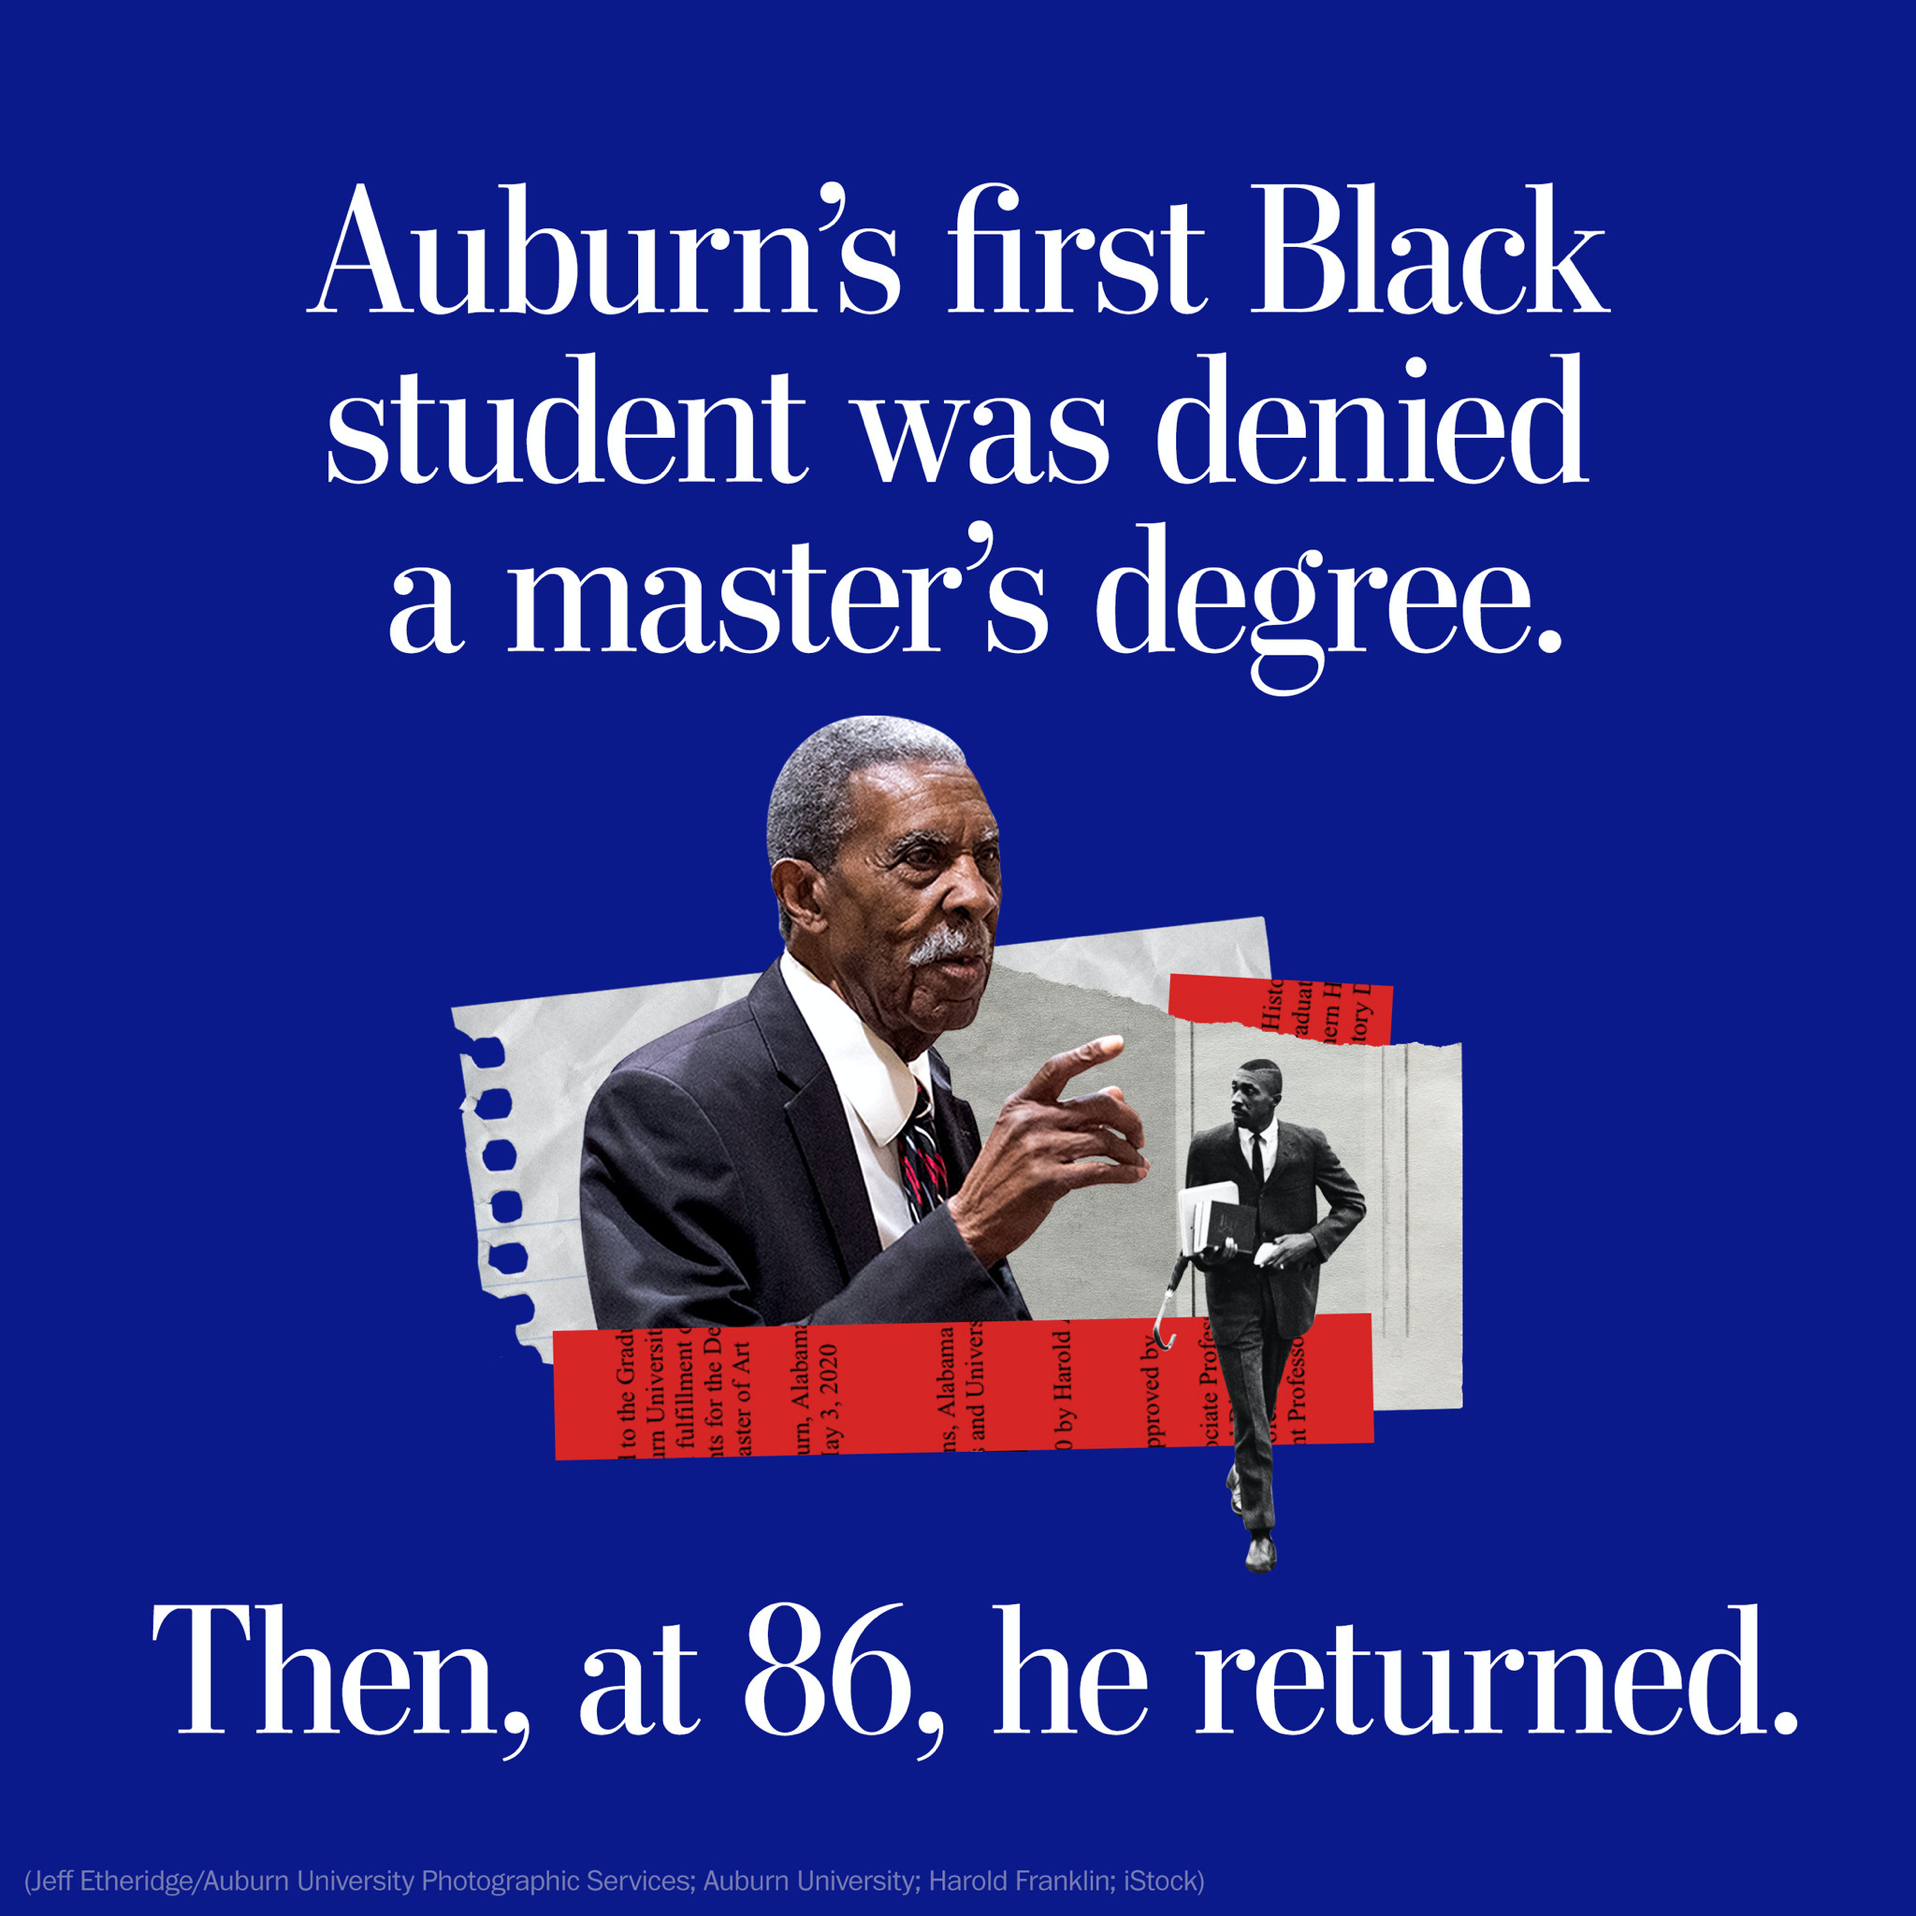 You are currently viewing Auburn’s first Black student was denied a master’s degree